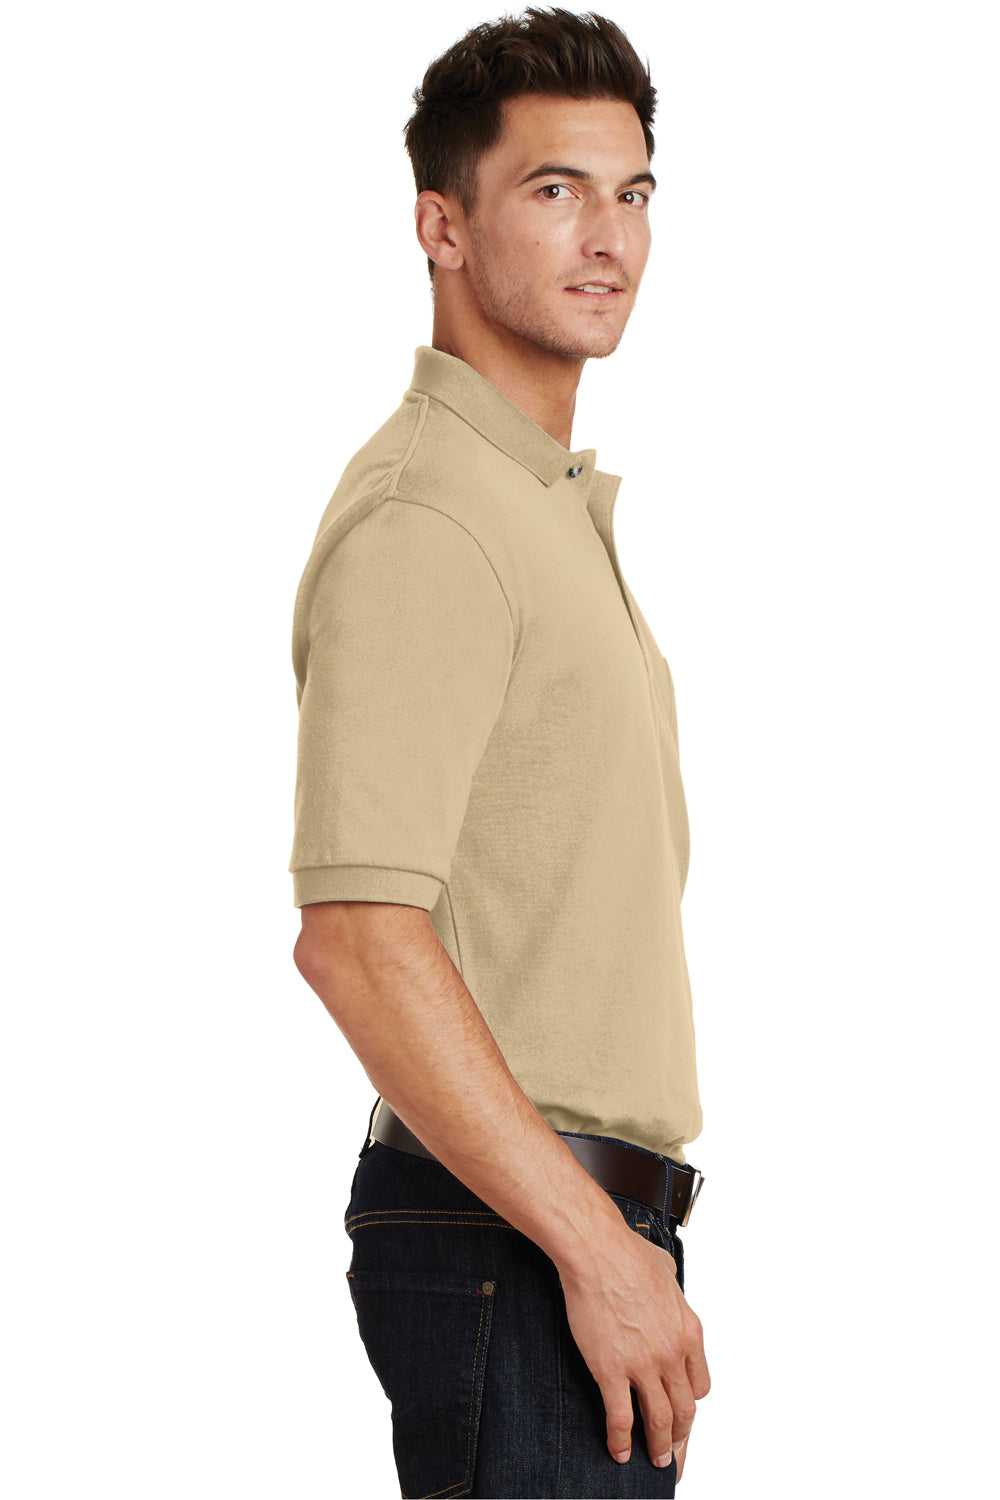 Port Authority K420P Mens Short Sleeve Polo Shirt w/ Pocket Stone Brown Side